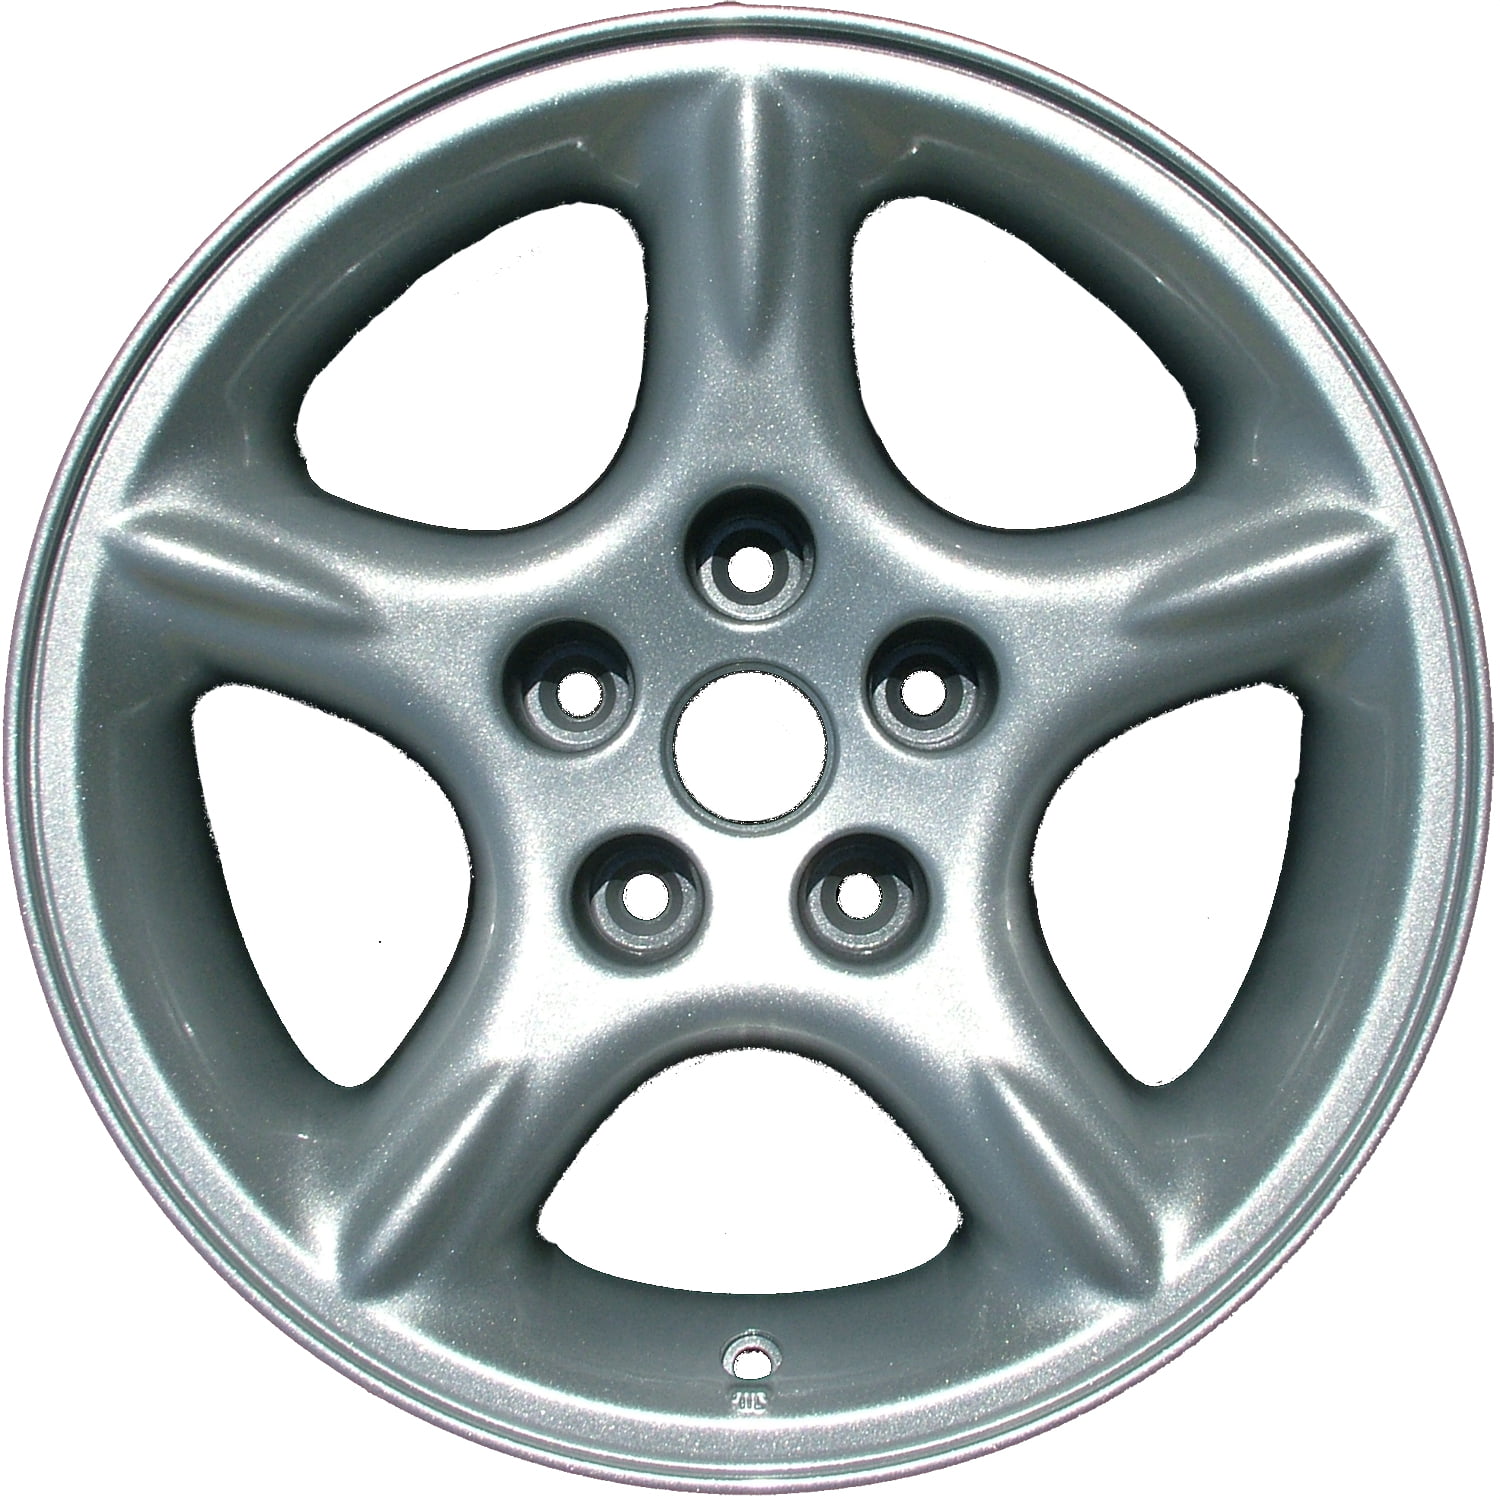 16 X 7 Reconditioned OEM Aluminum Alloy Wheel, Gray Charcoal Textured  Machined Lip, Fits 2000-2001 Jeep Wrangler 